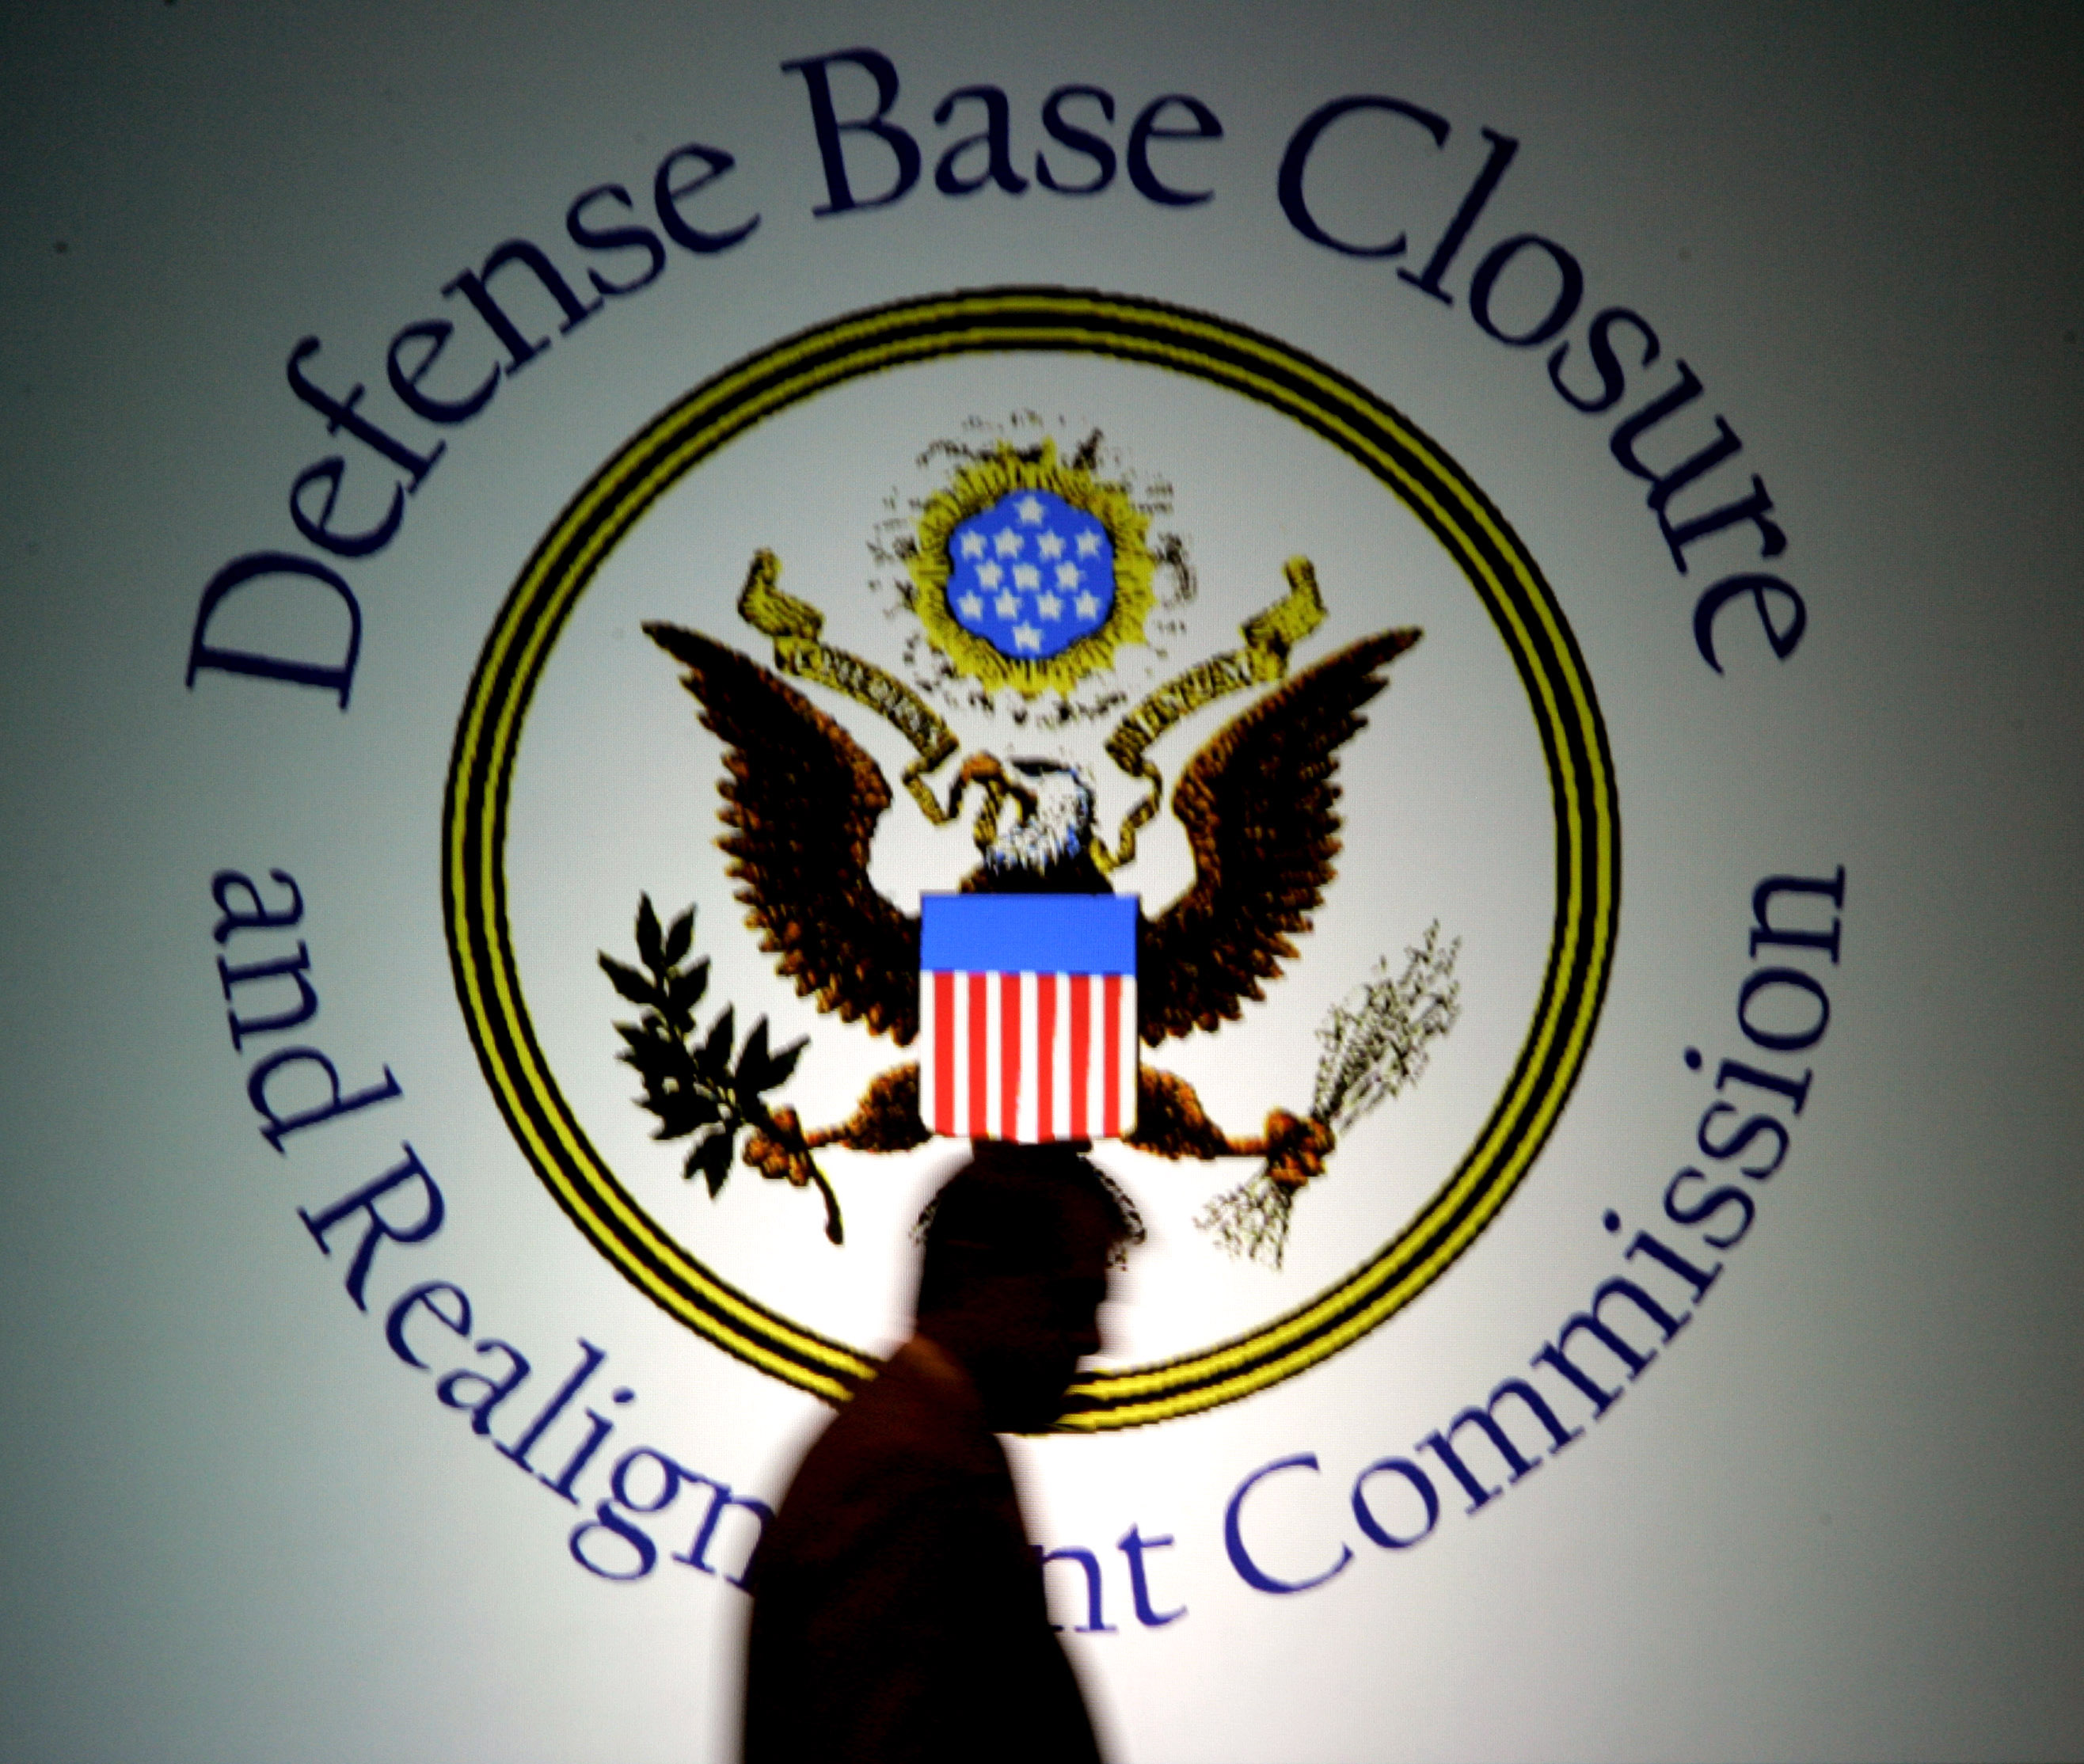 Saving Defense Dollars From Base Realignment and Closure to Overhead